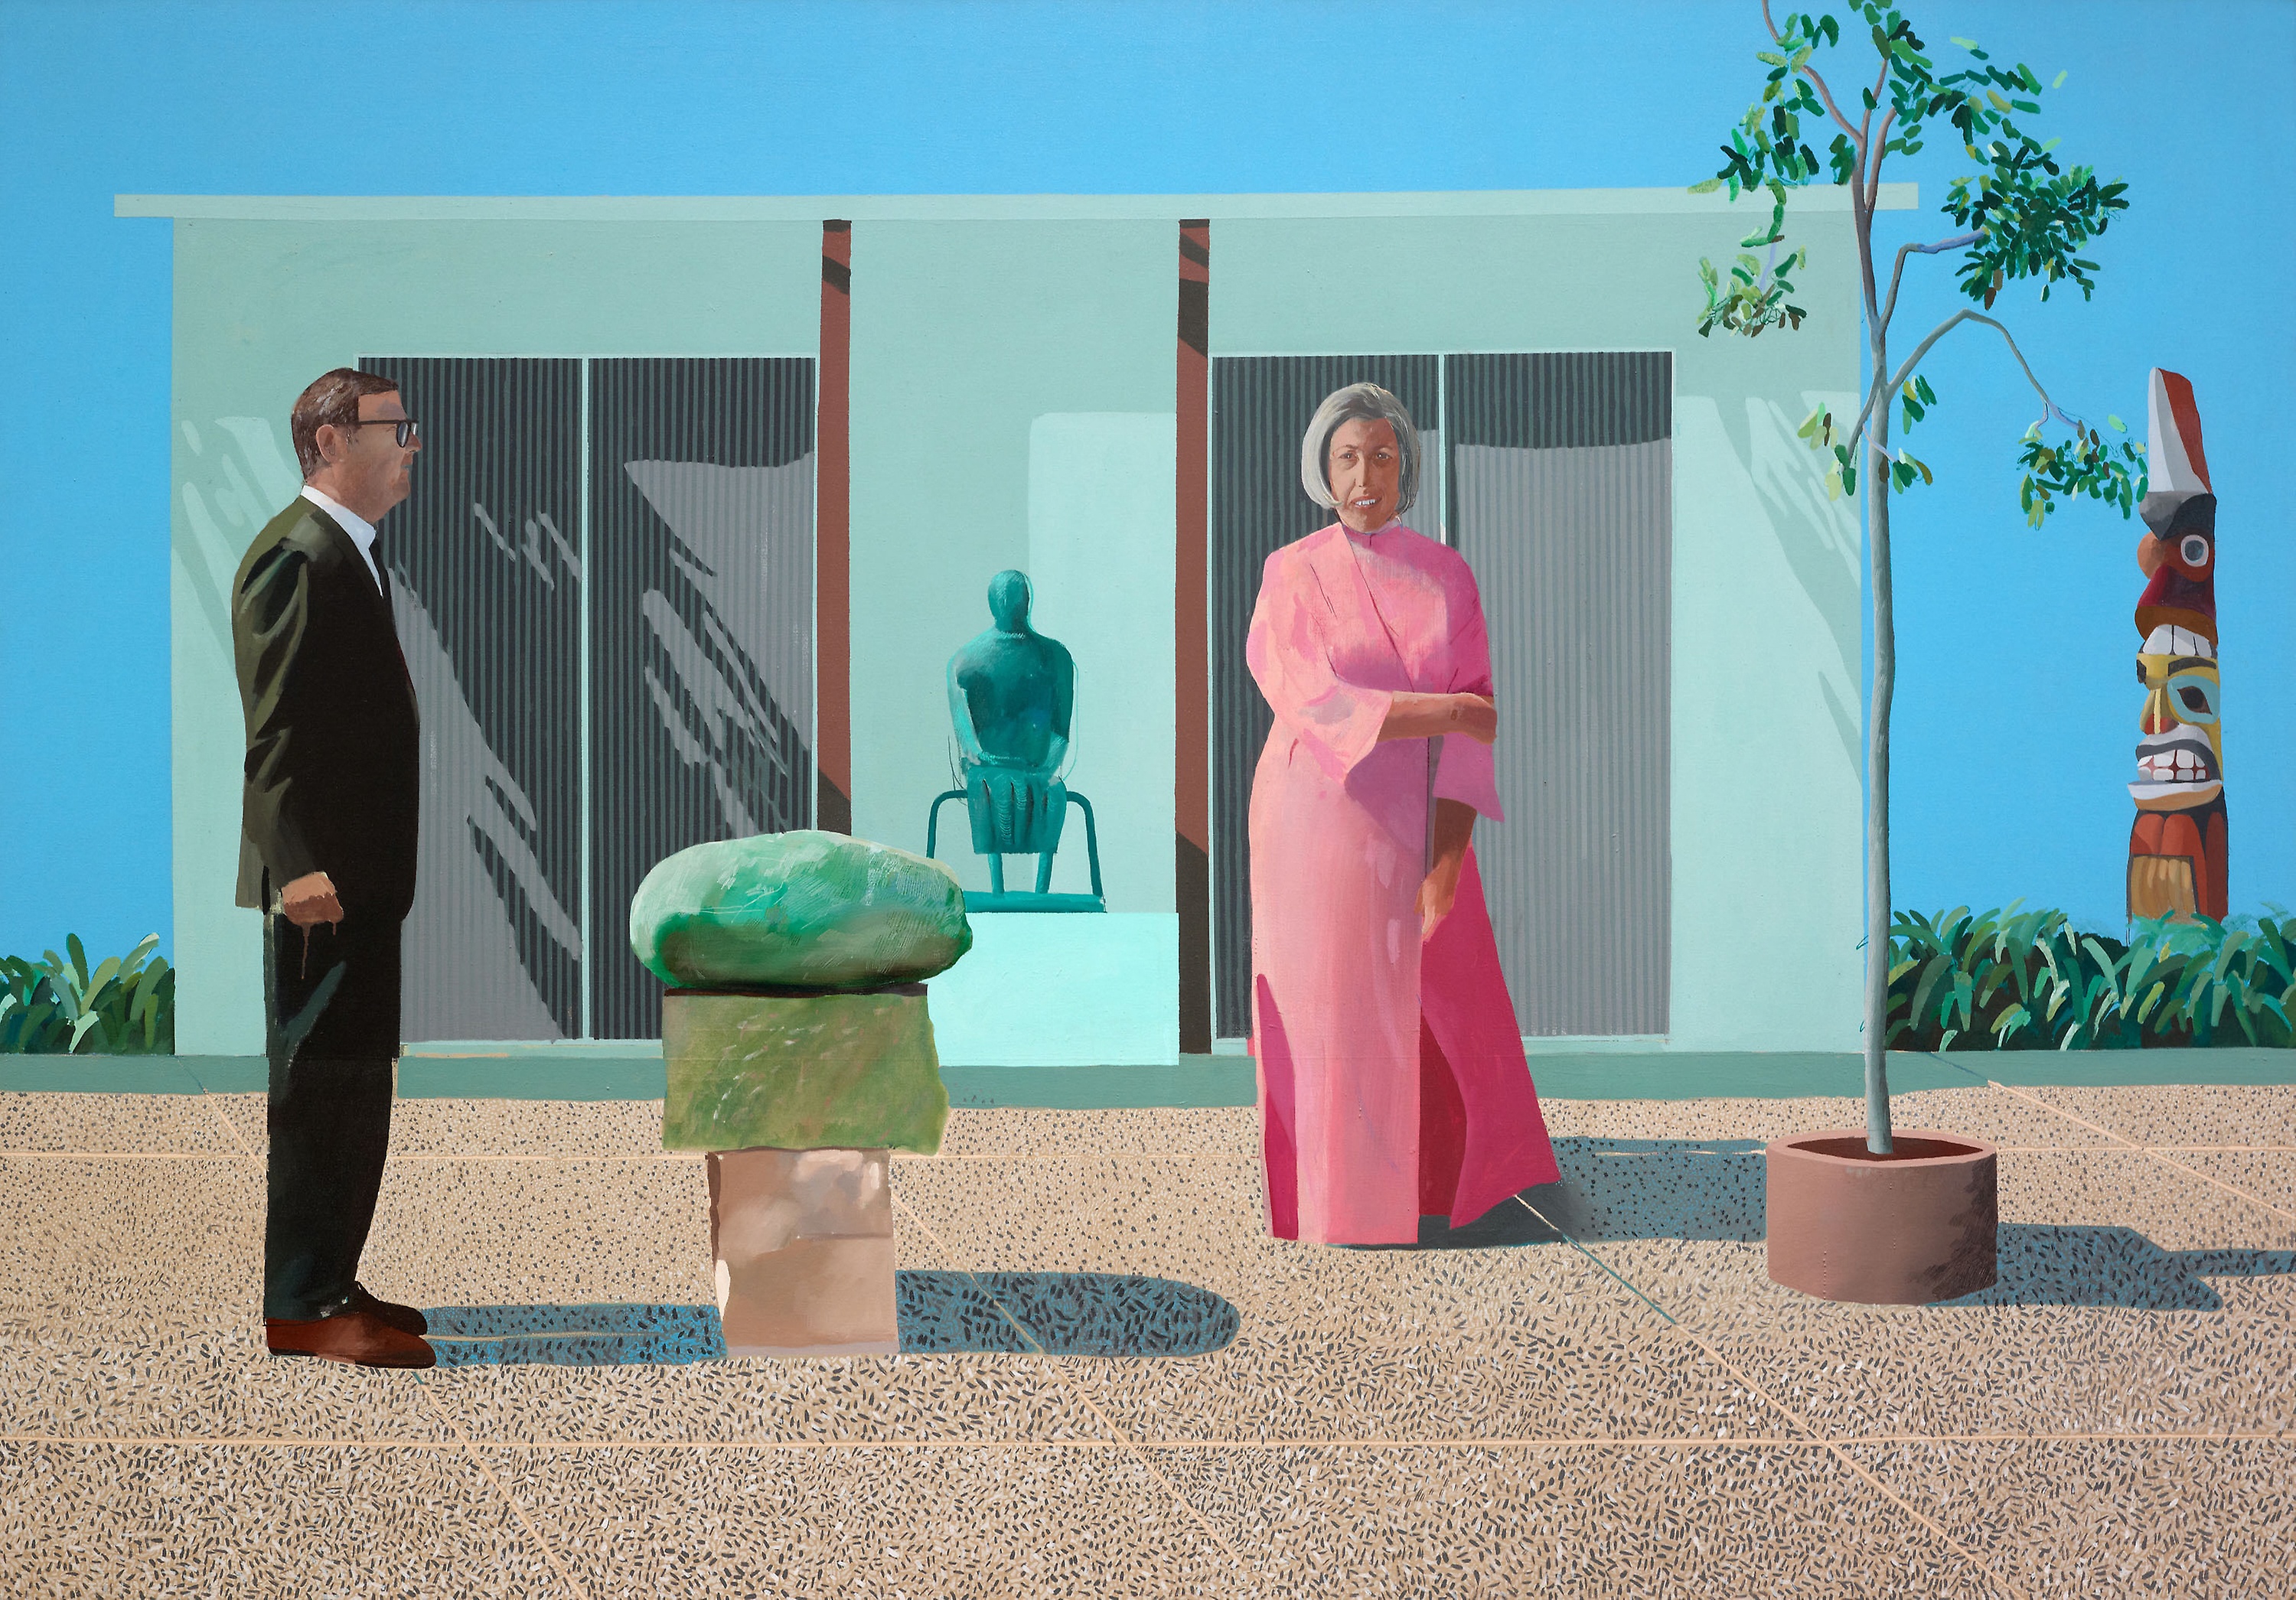 David Hockney. American Collectors (Fred and Marcia Weisman). 1968